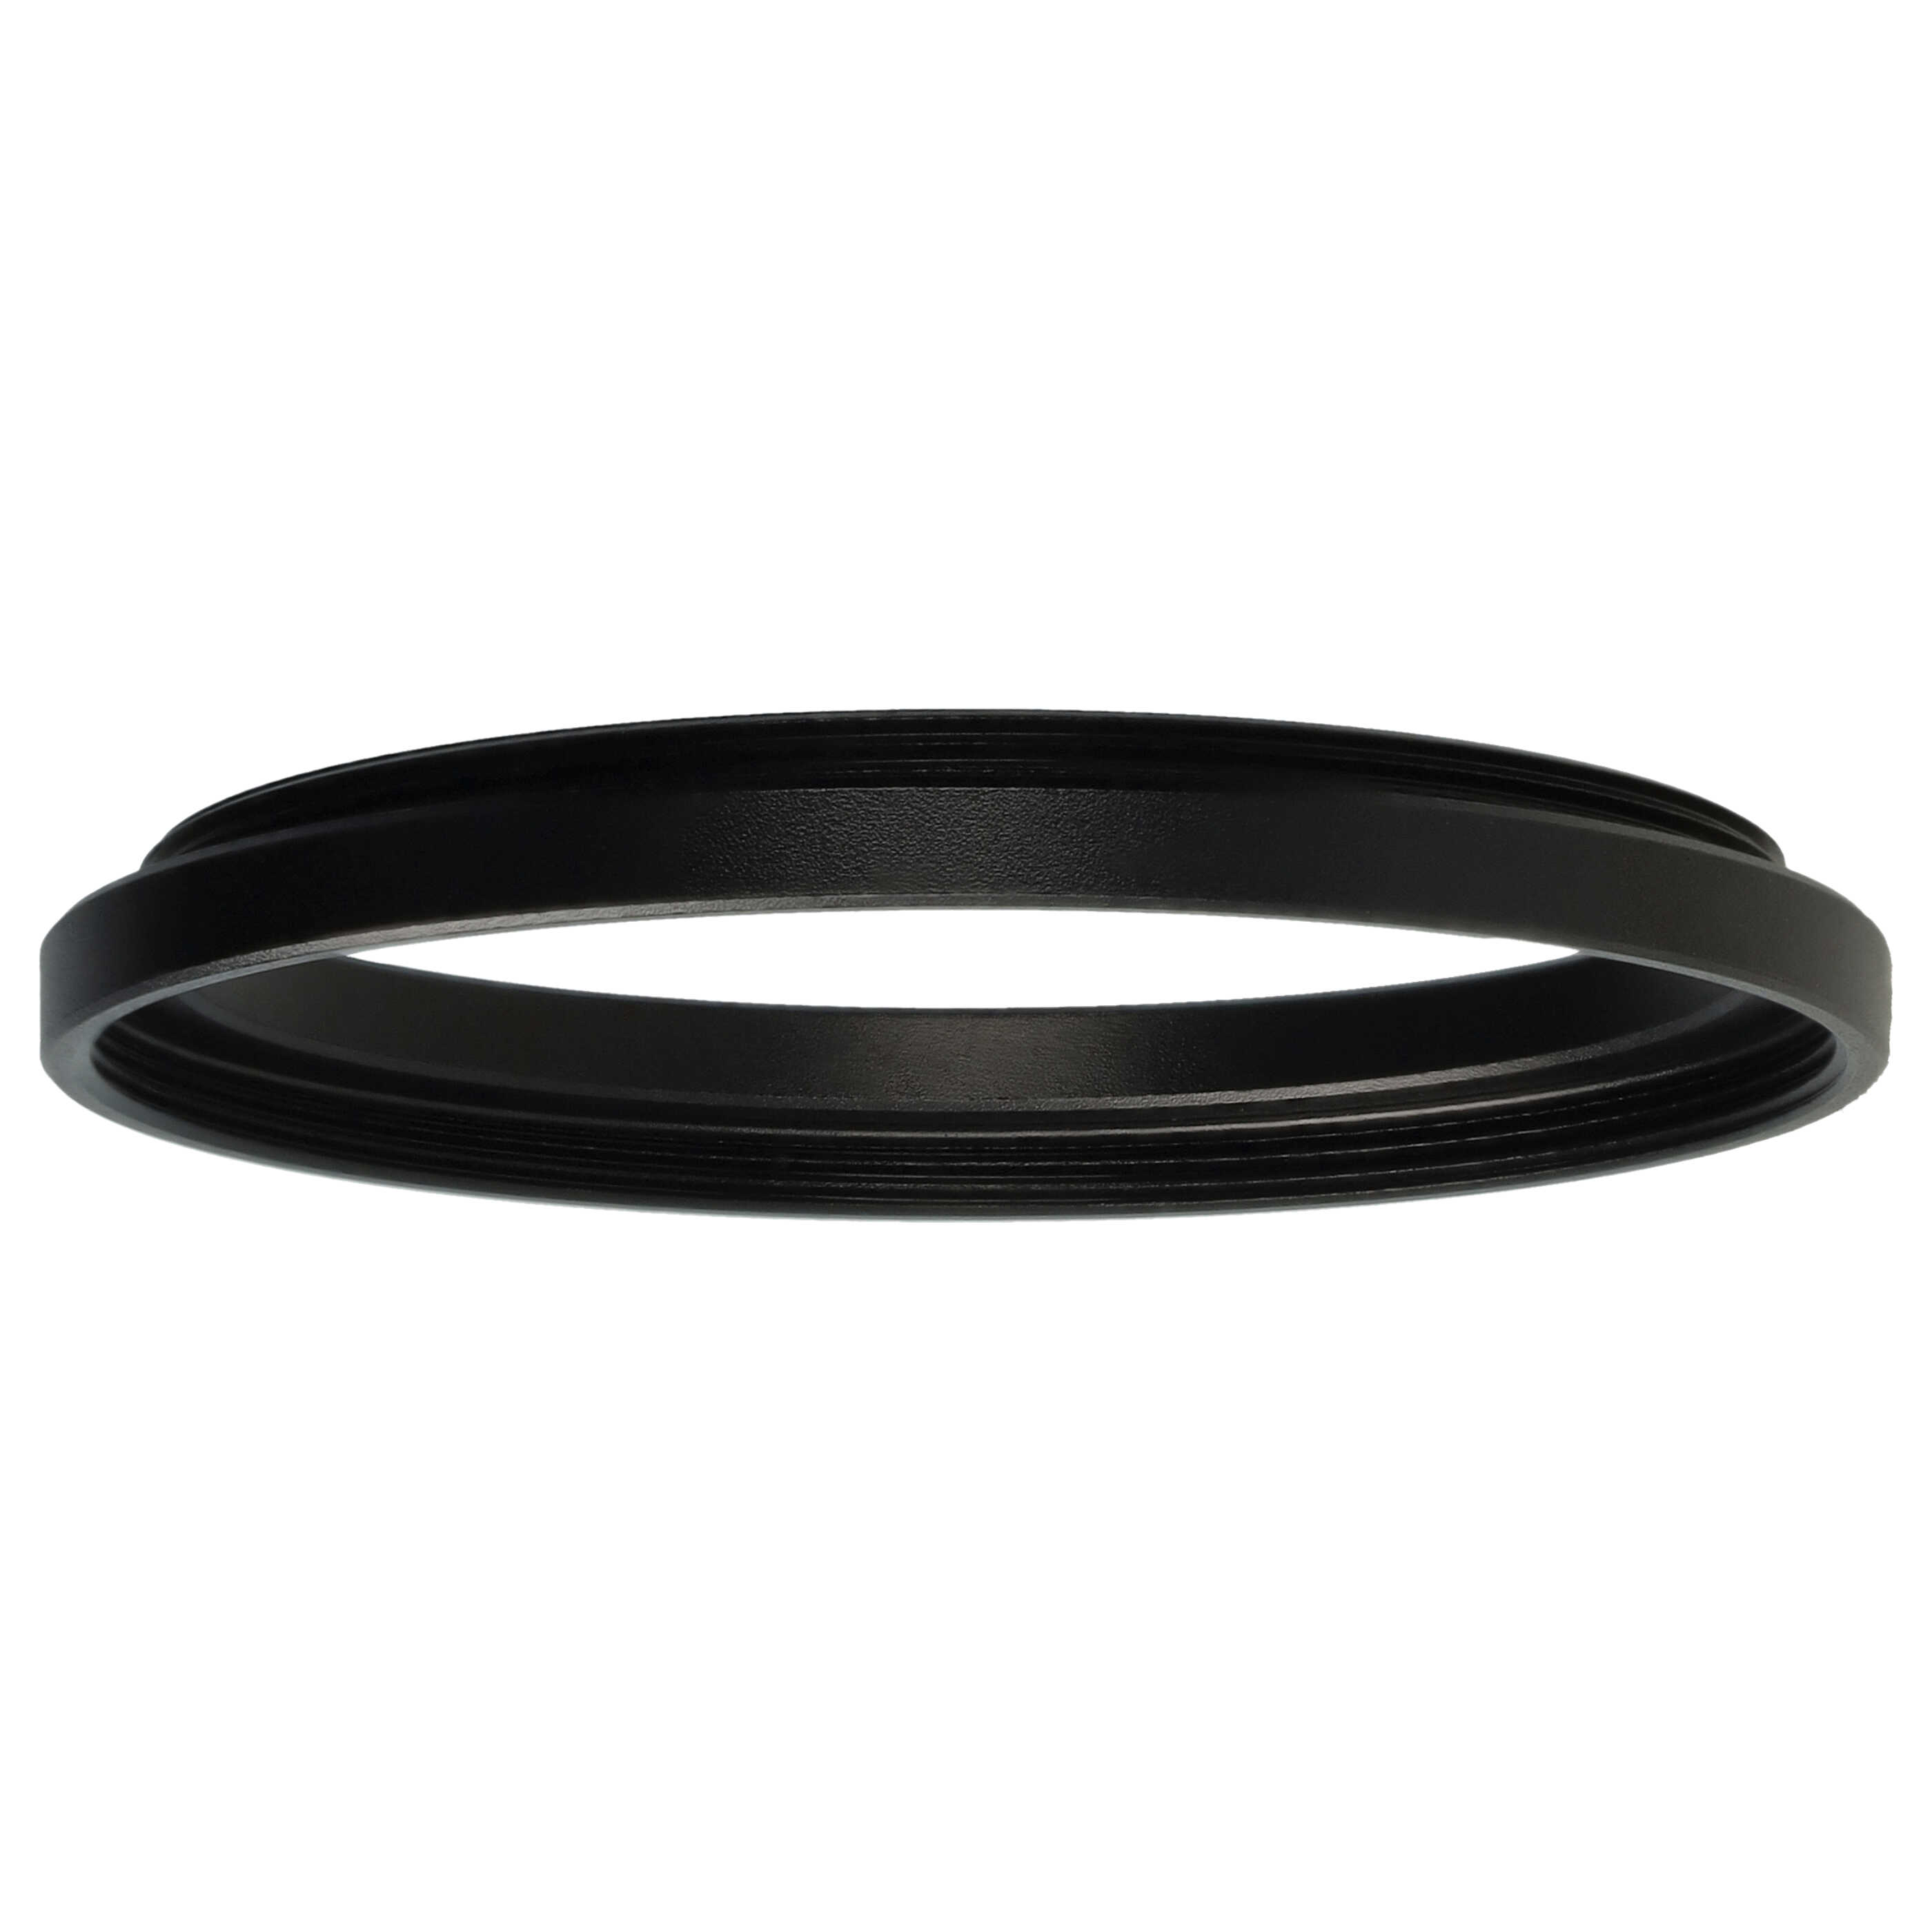 Step-Up Ring Adapter of 49 mm to 52 mmfor various Camera Lens - Filter Adapter